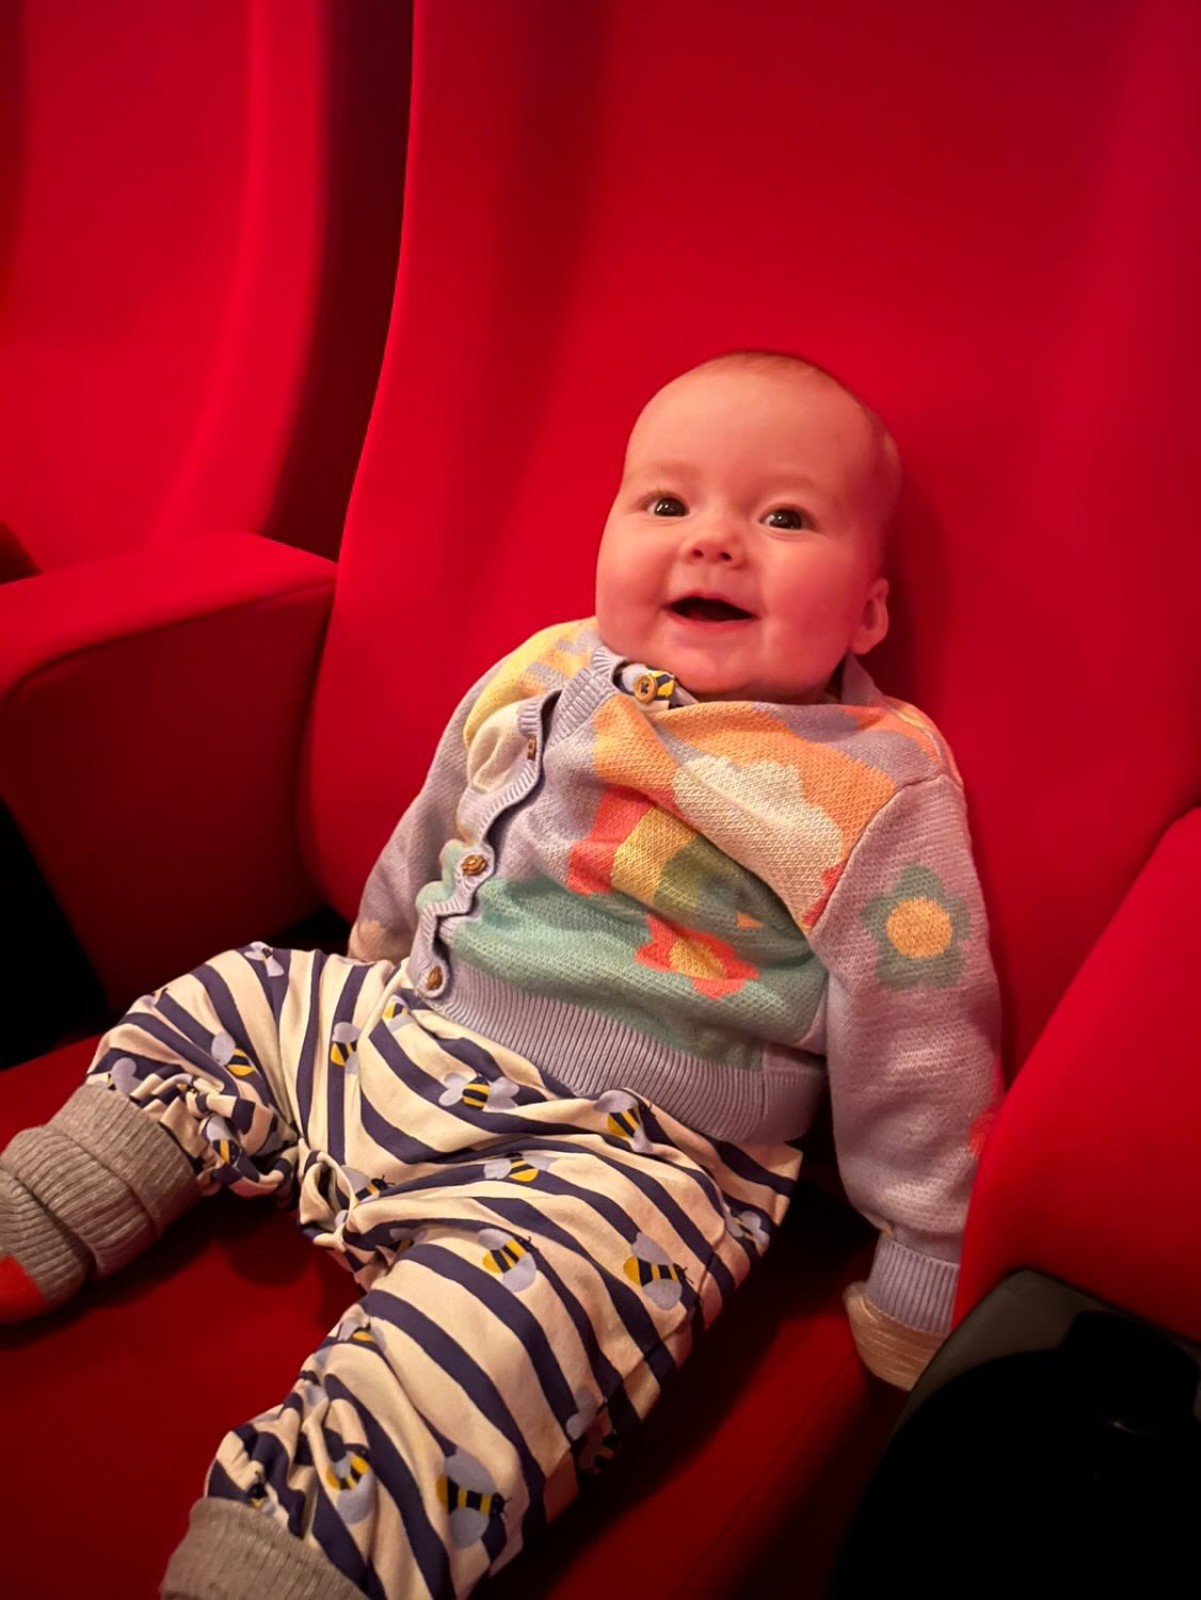 Wren attending one of our latest screenings